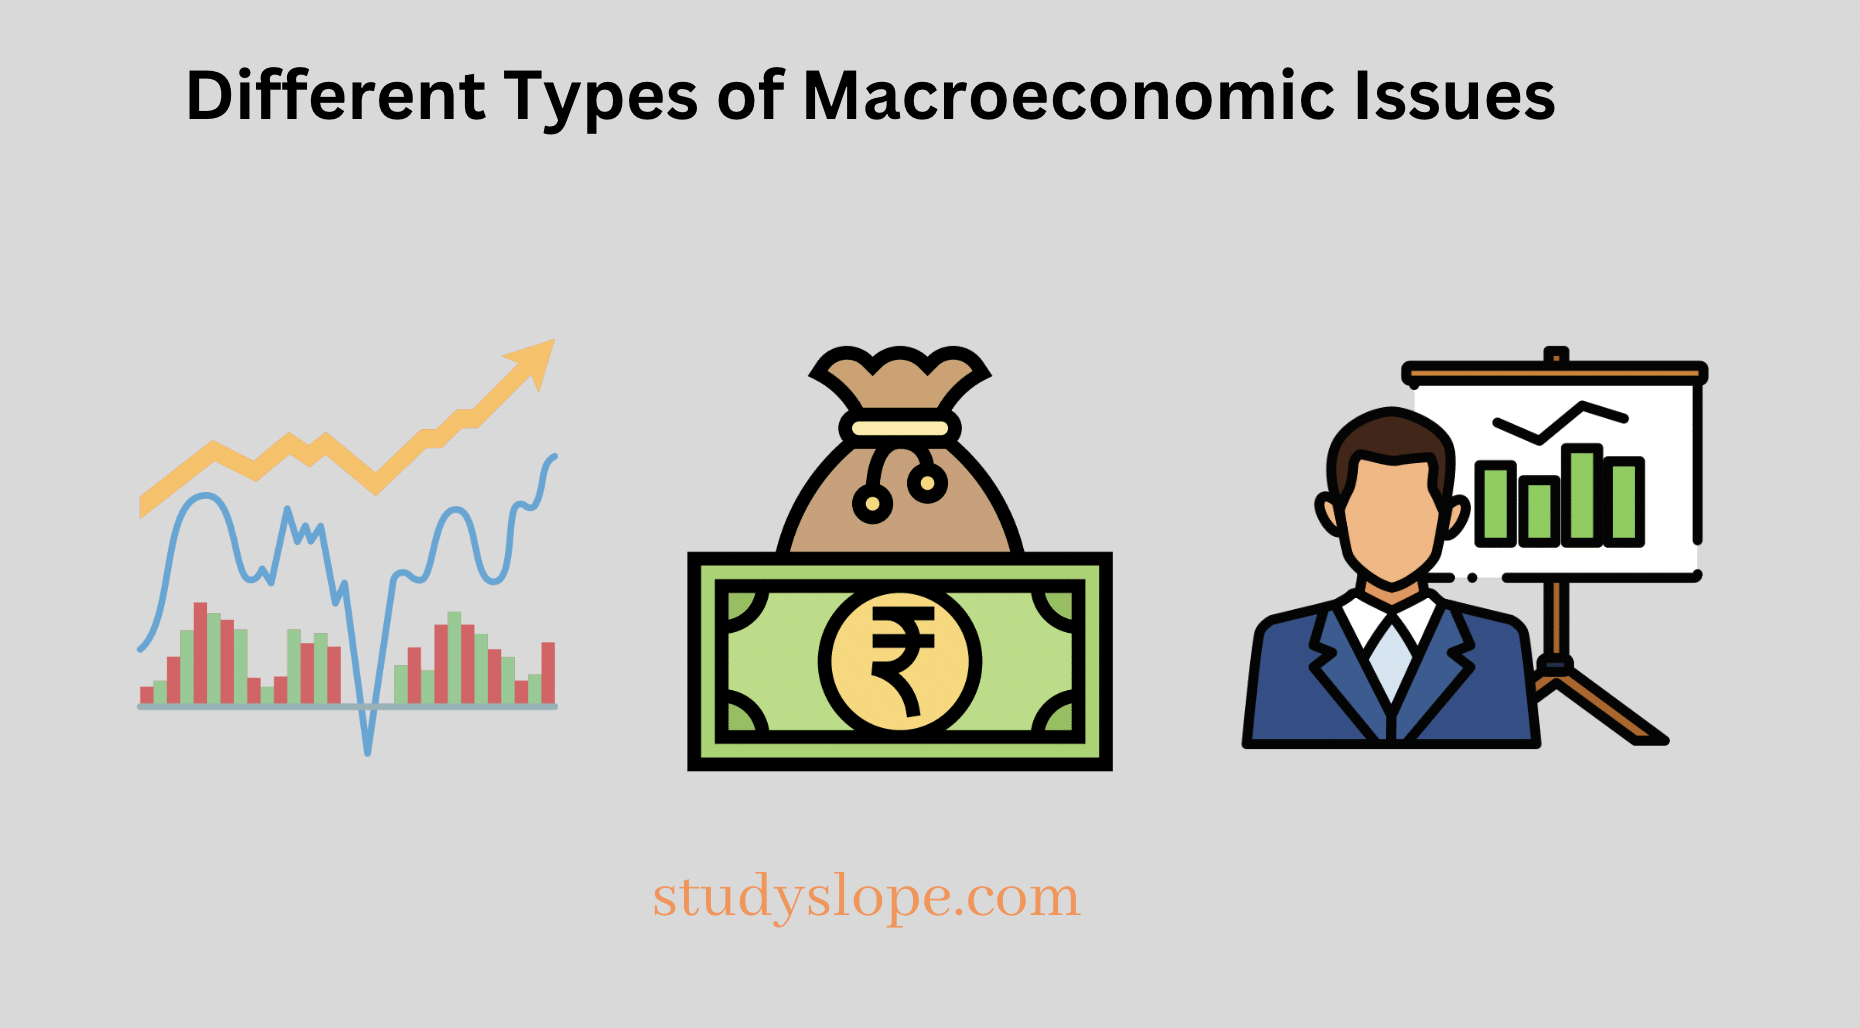 Different Types of Macroeconomic Issues